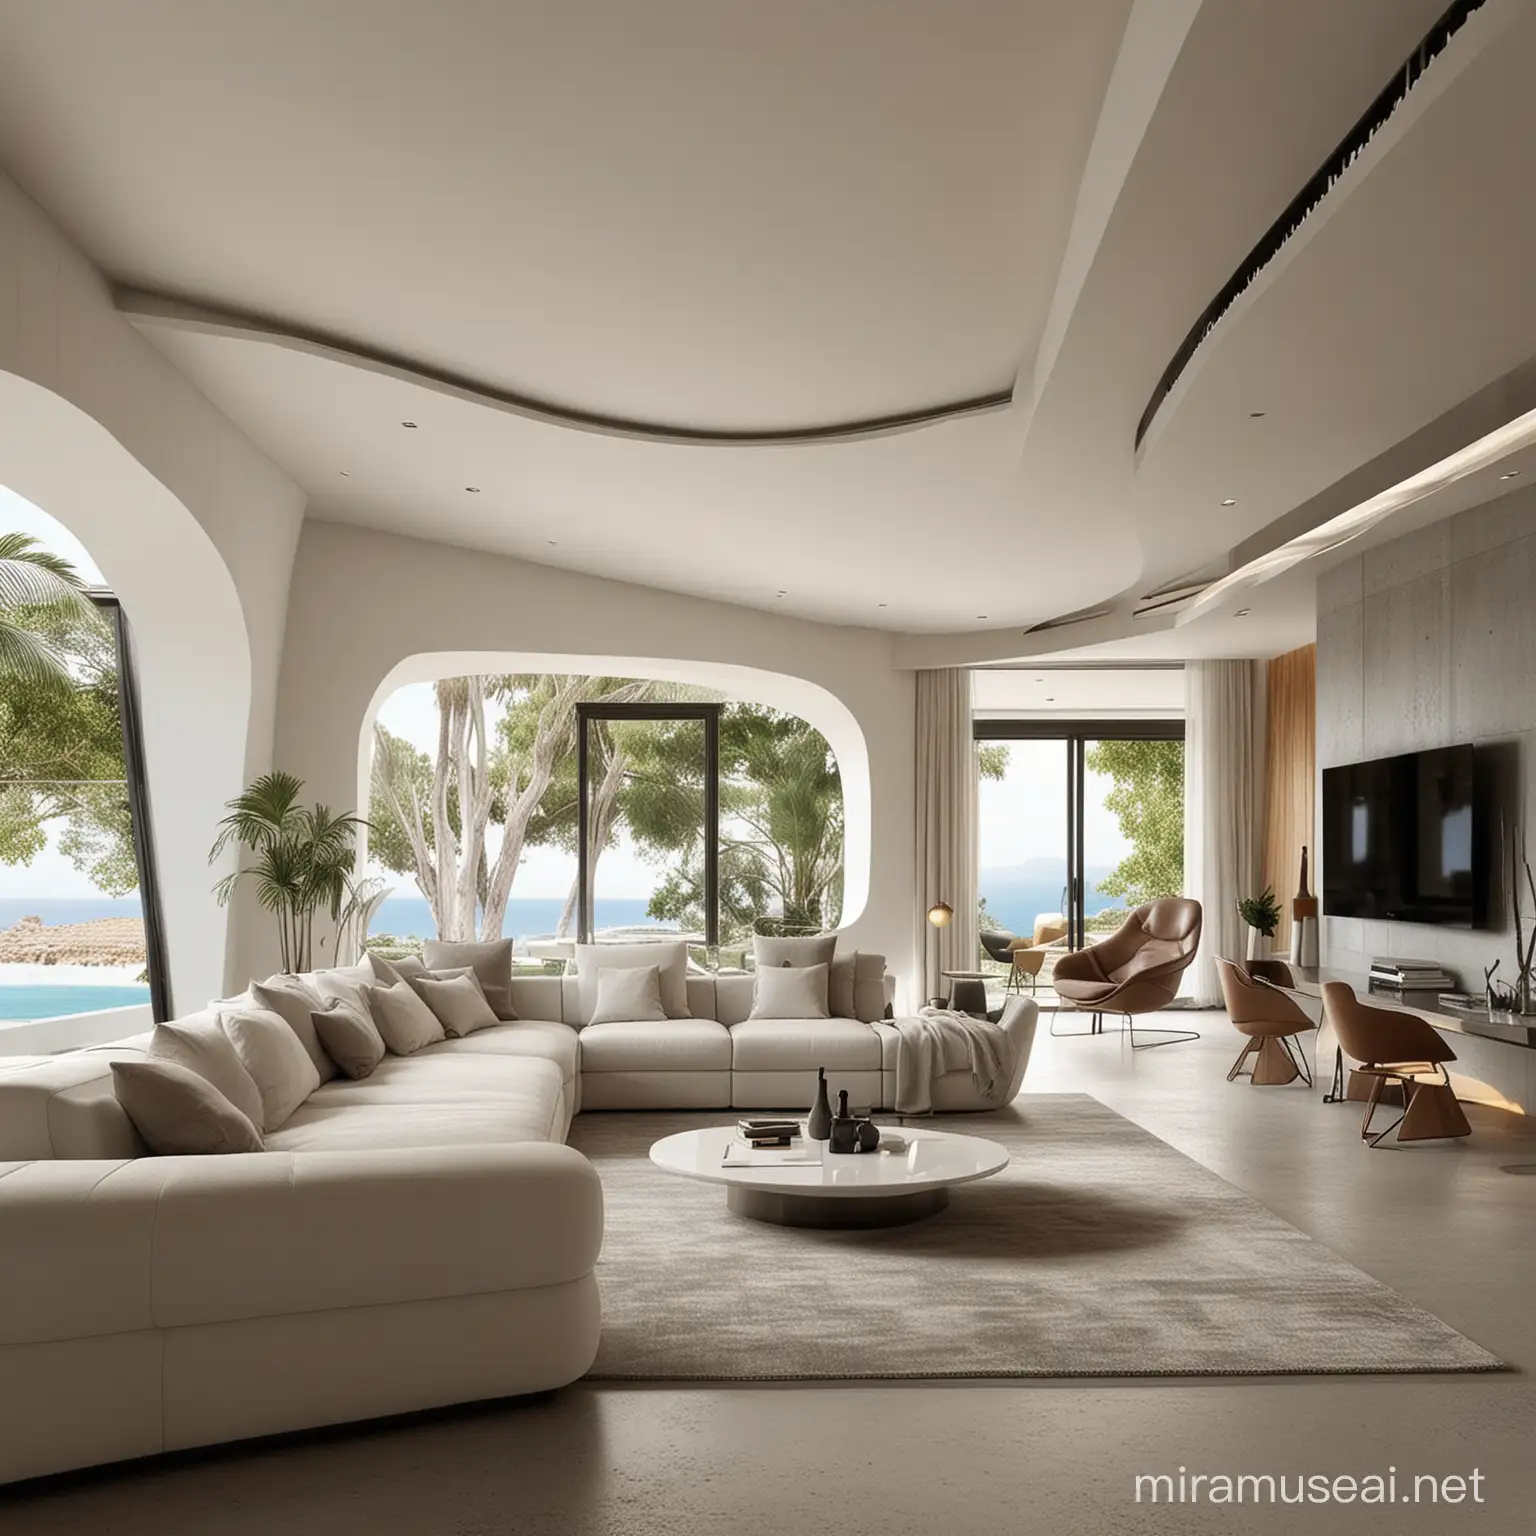 Futuristic Sicilian Living Room Inspired by Zaha Hadids Architectural Works